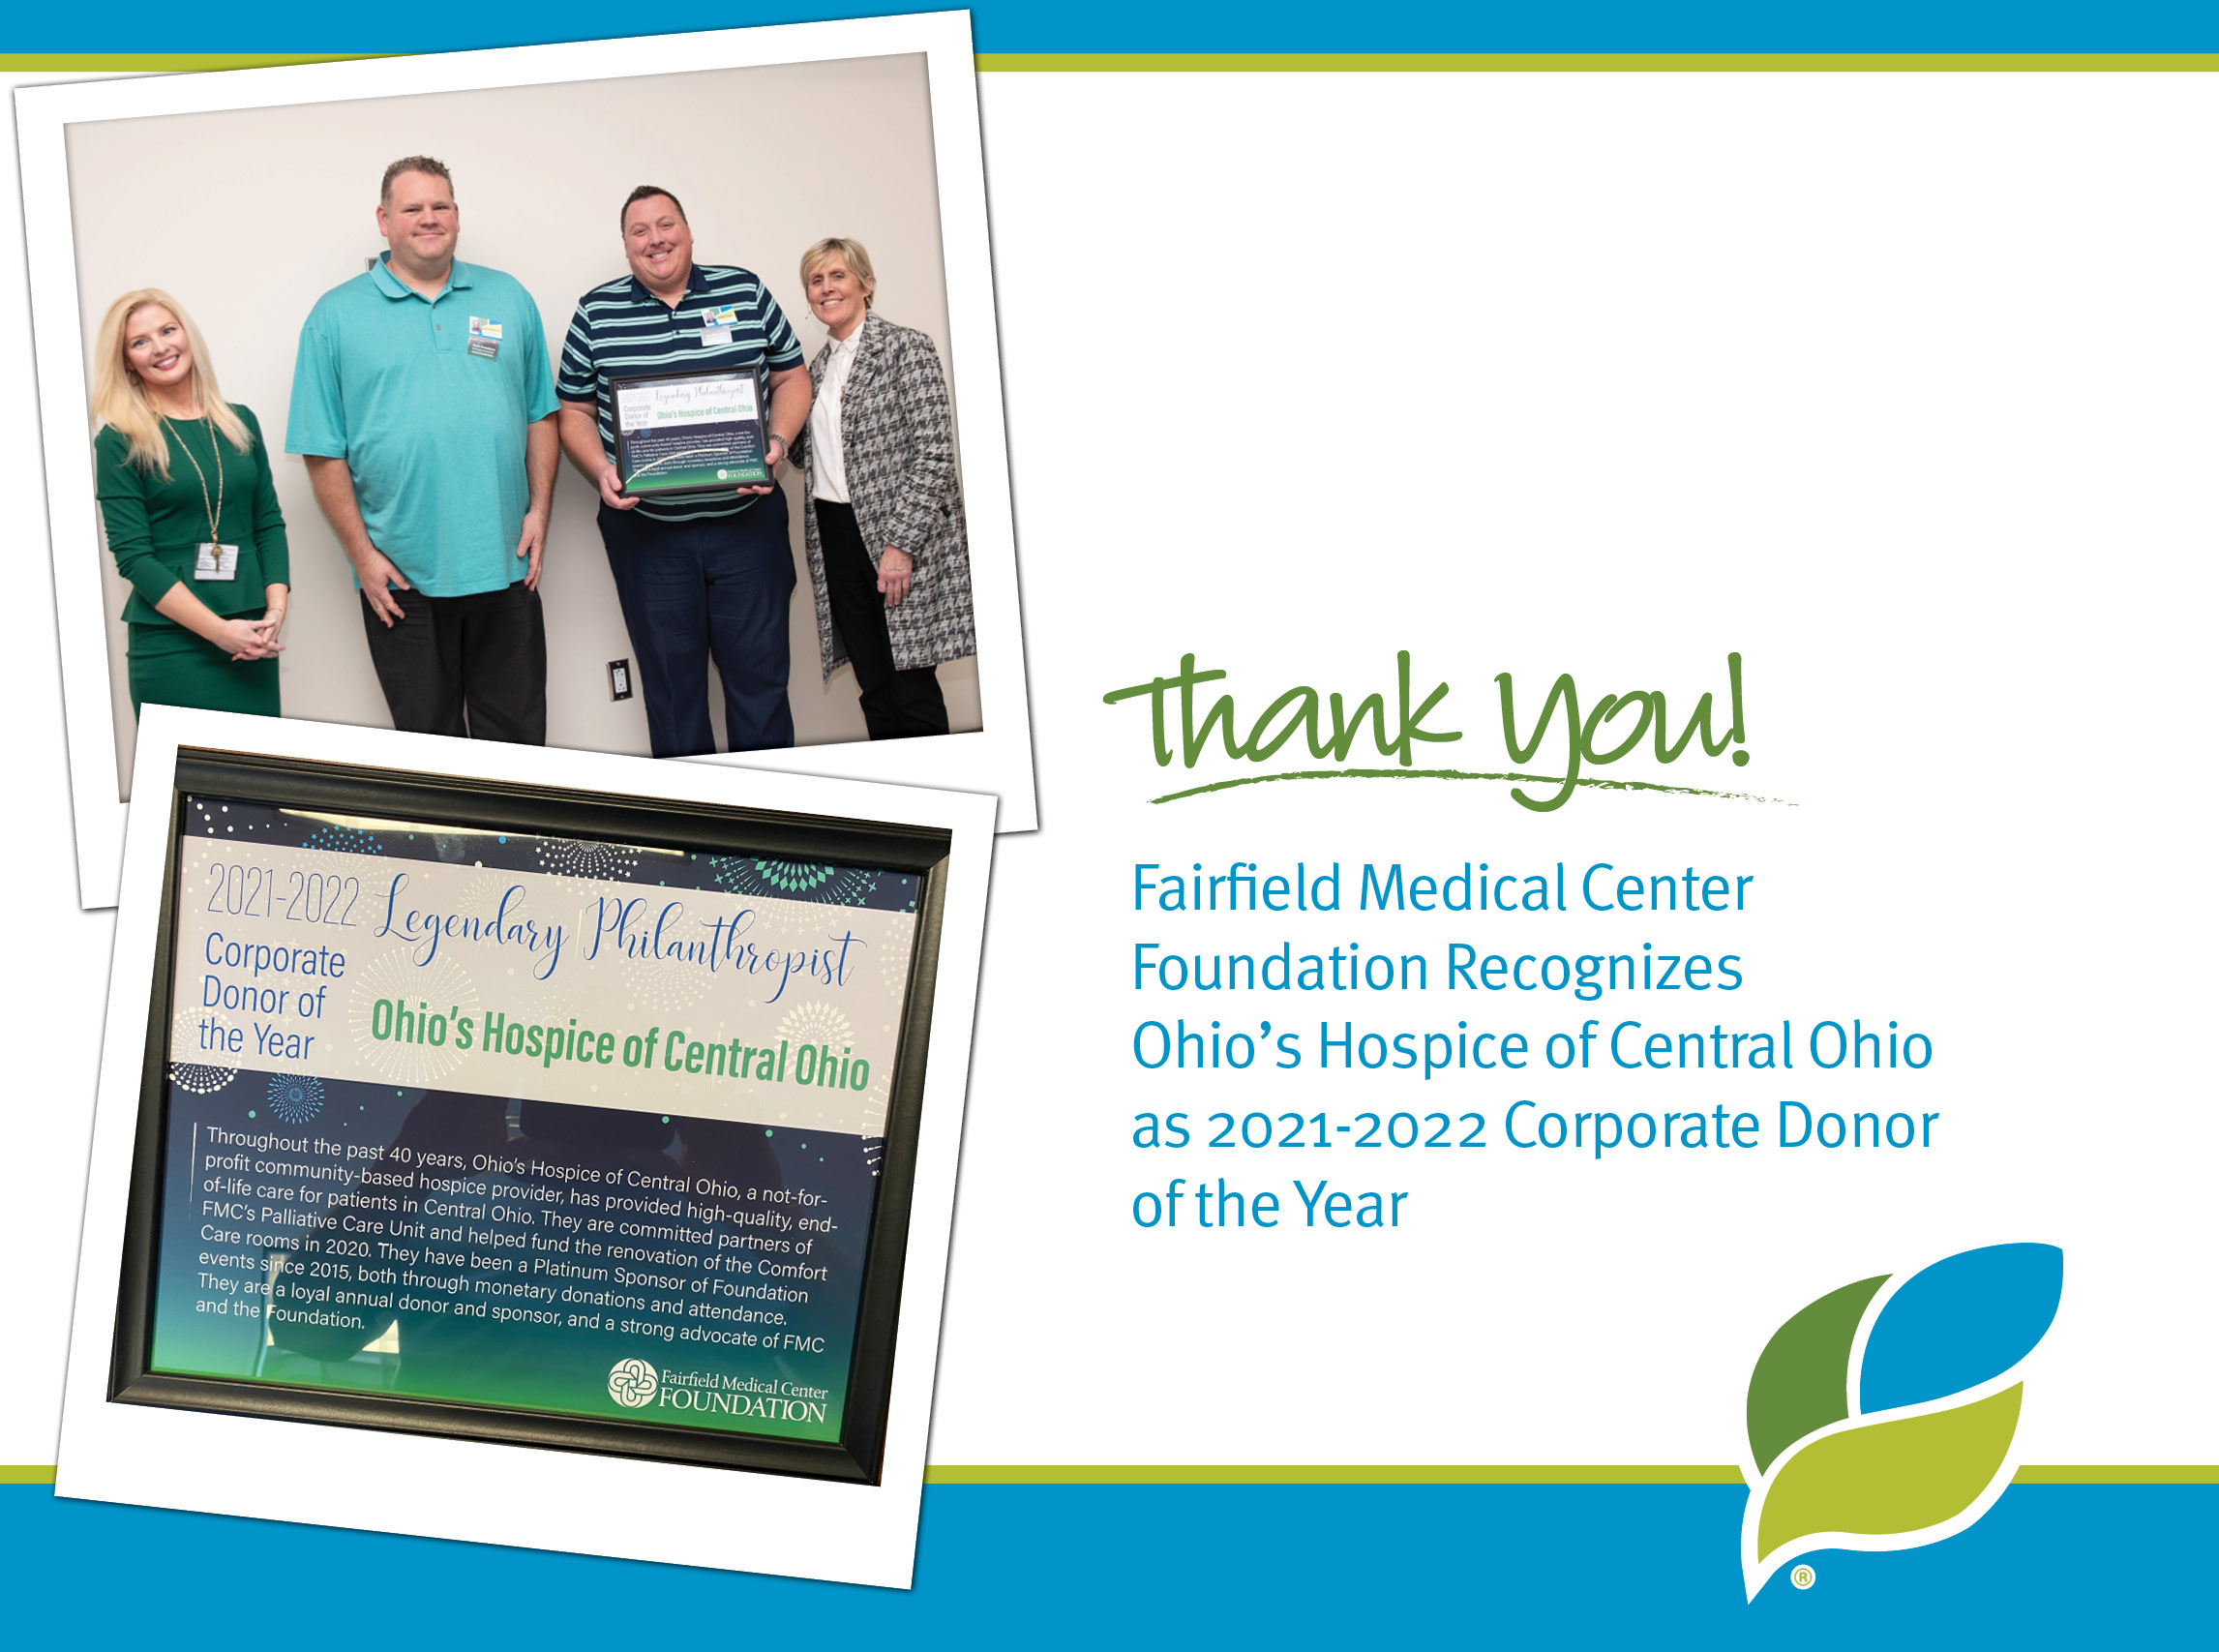 Thank you! Fairfield Medical Center Foundation Recognizes Ohio's Hospice of Central Ohio as 2001-2022 Corporate Donor of the Year.